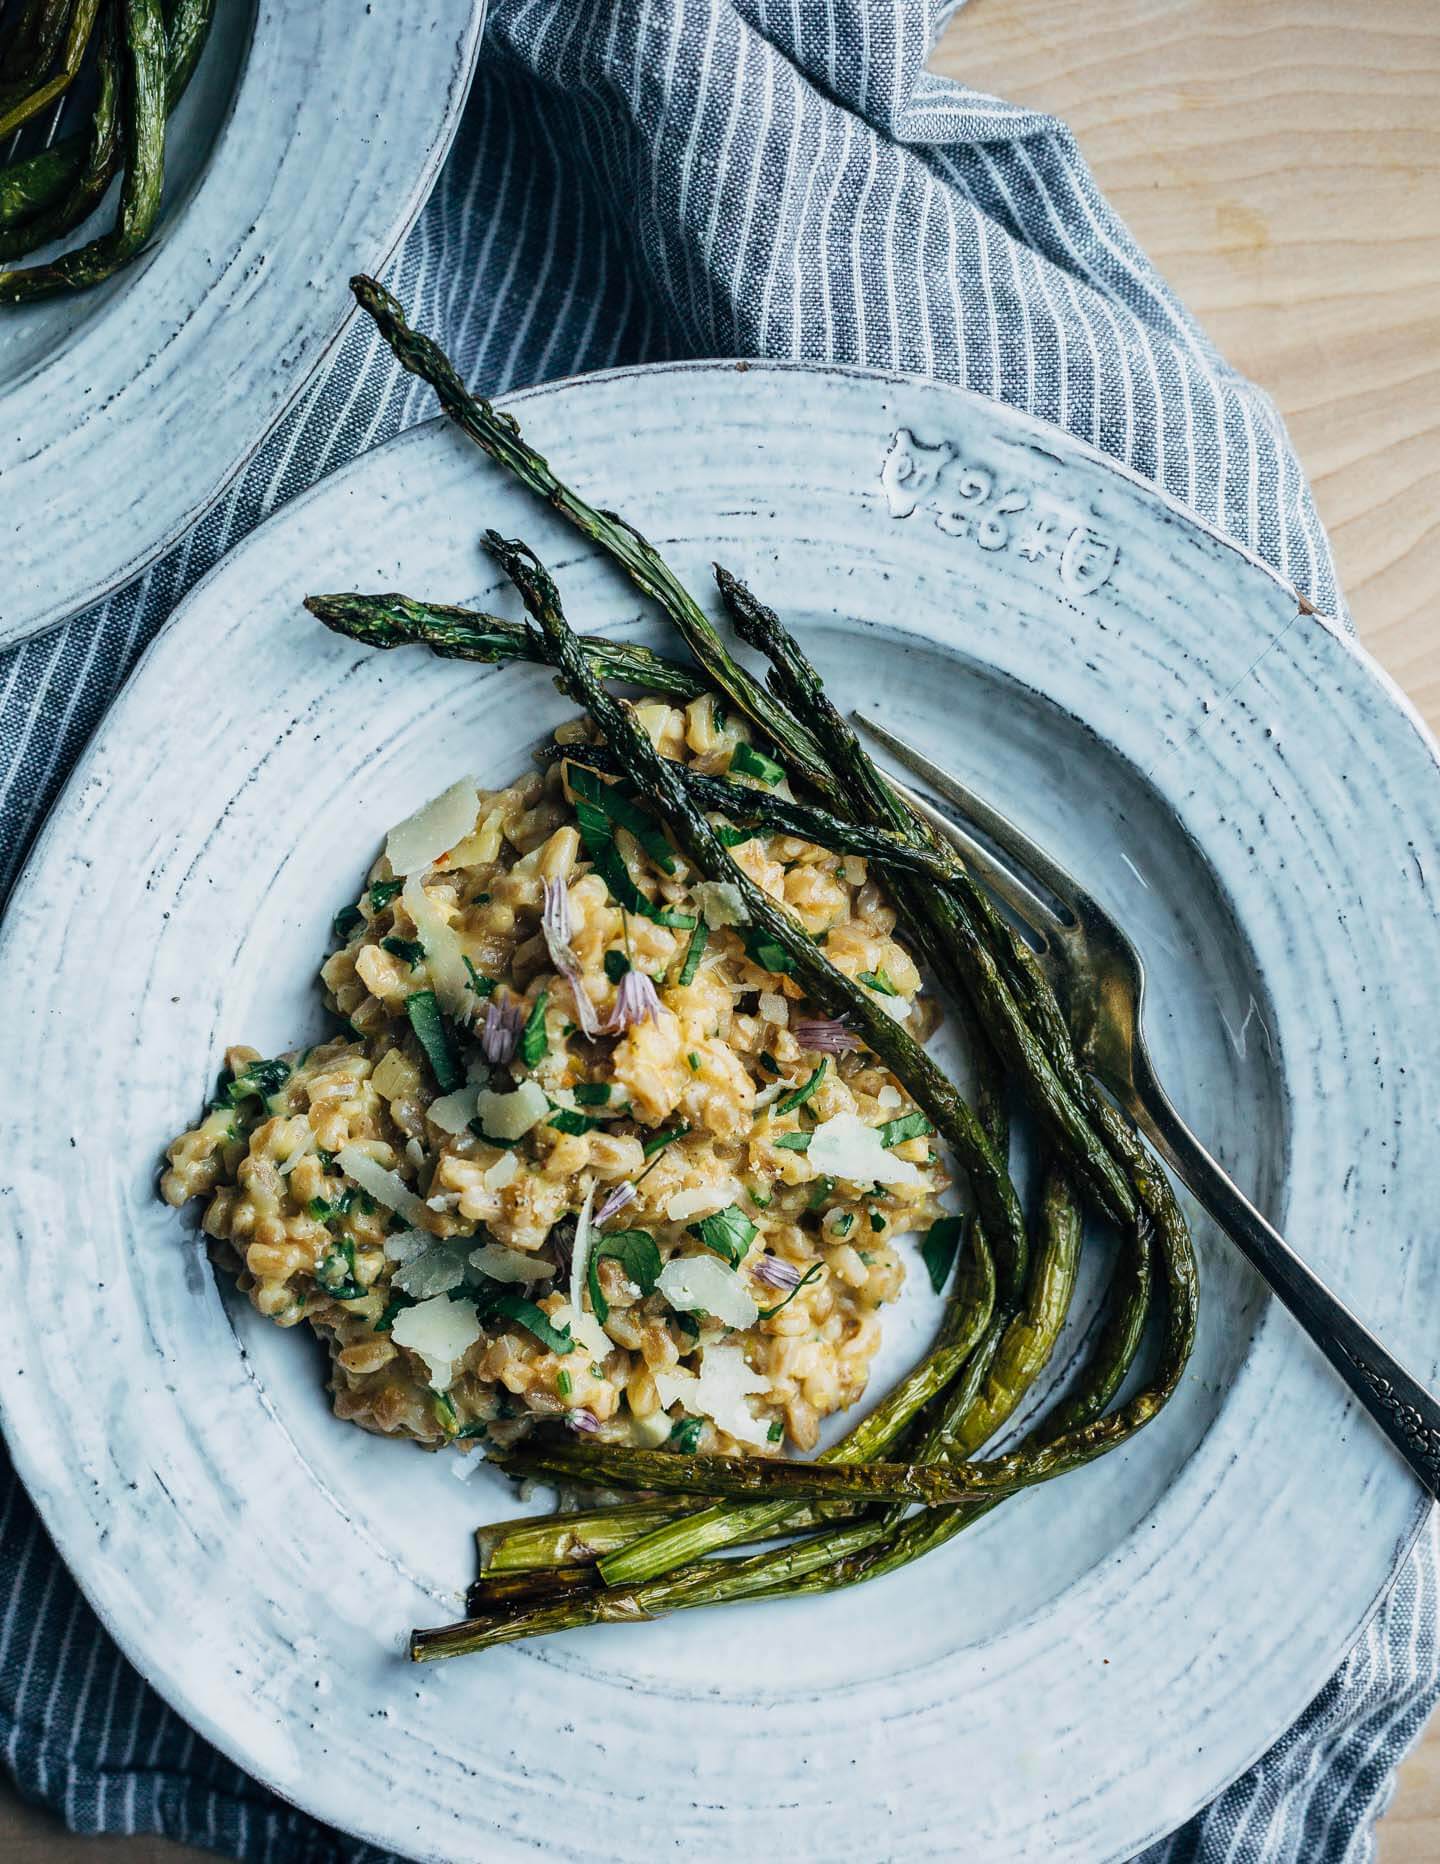 Creamy farro risotto (aka farrotto) with all the best spring things like ramps, young garlic, chives, and roasted asparagus. 